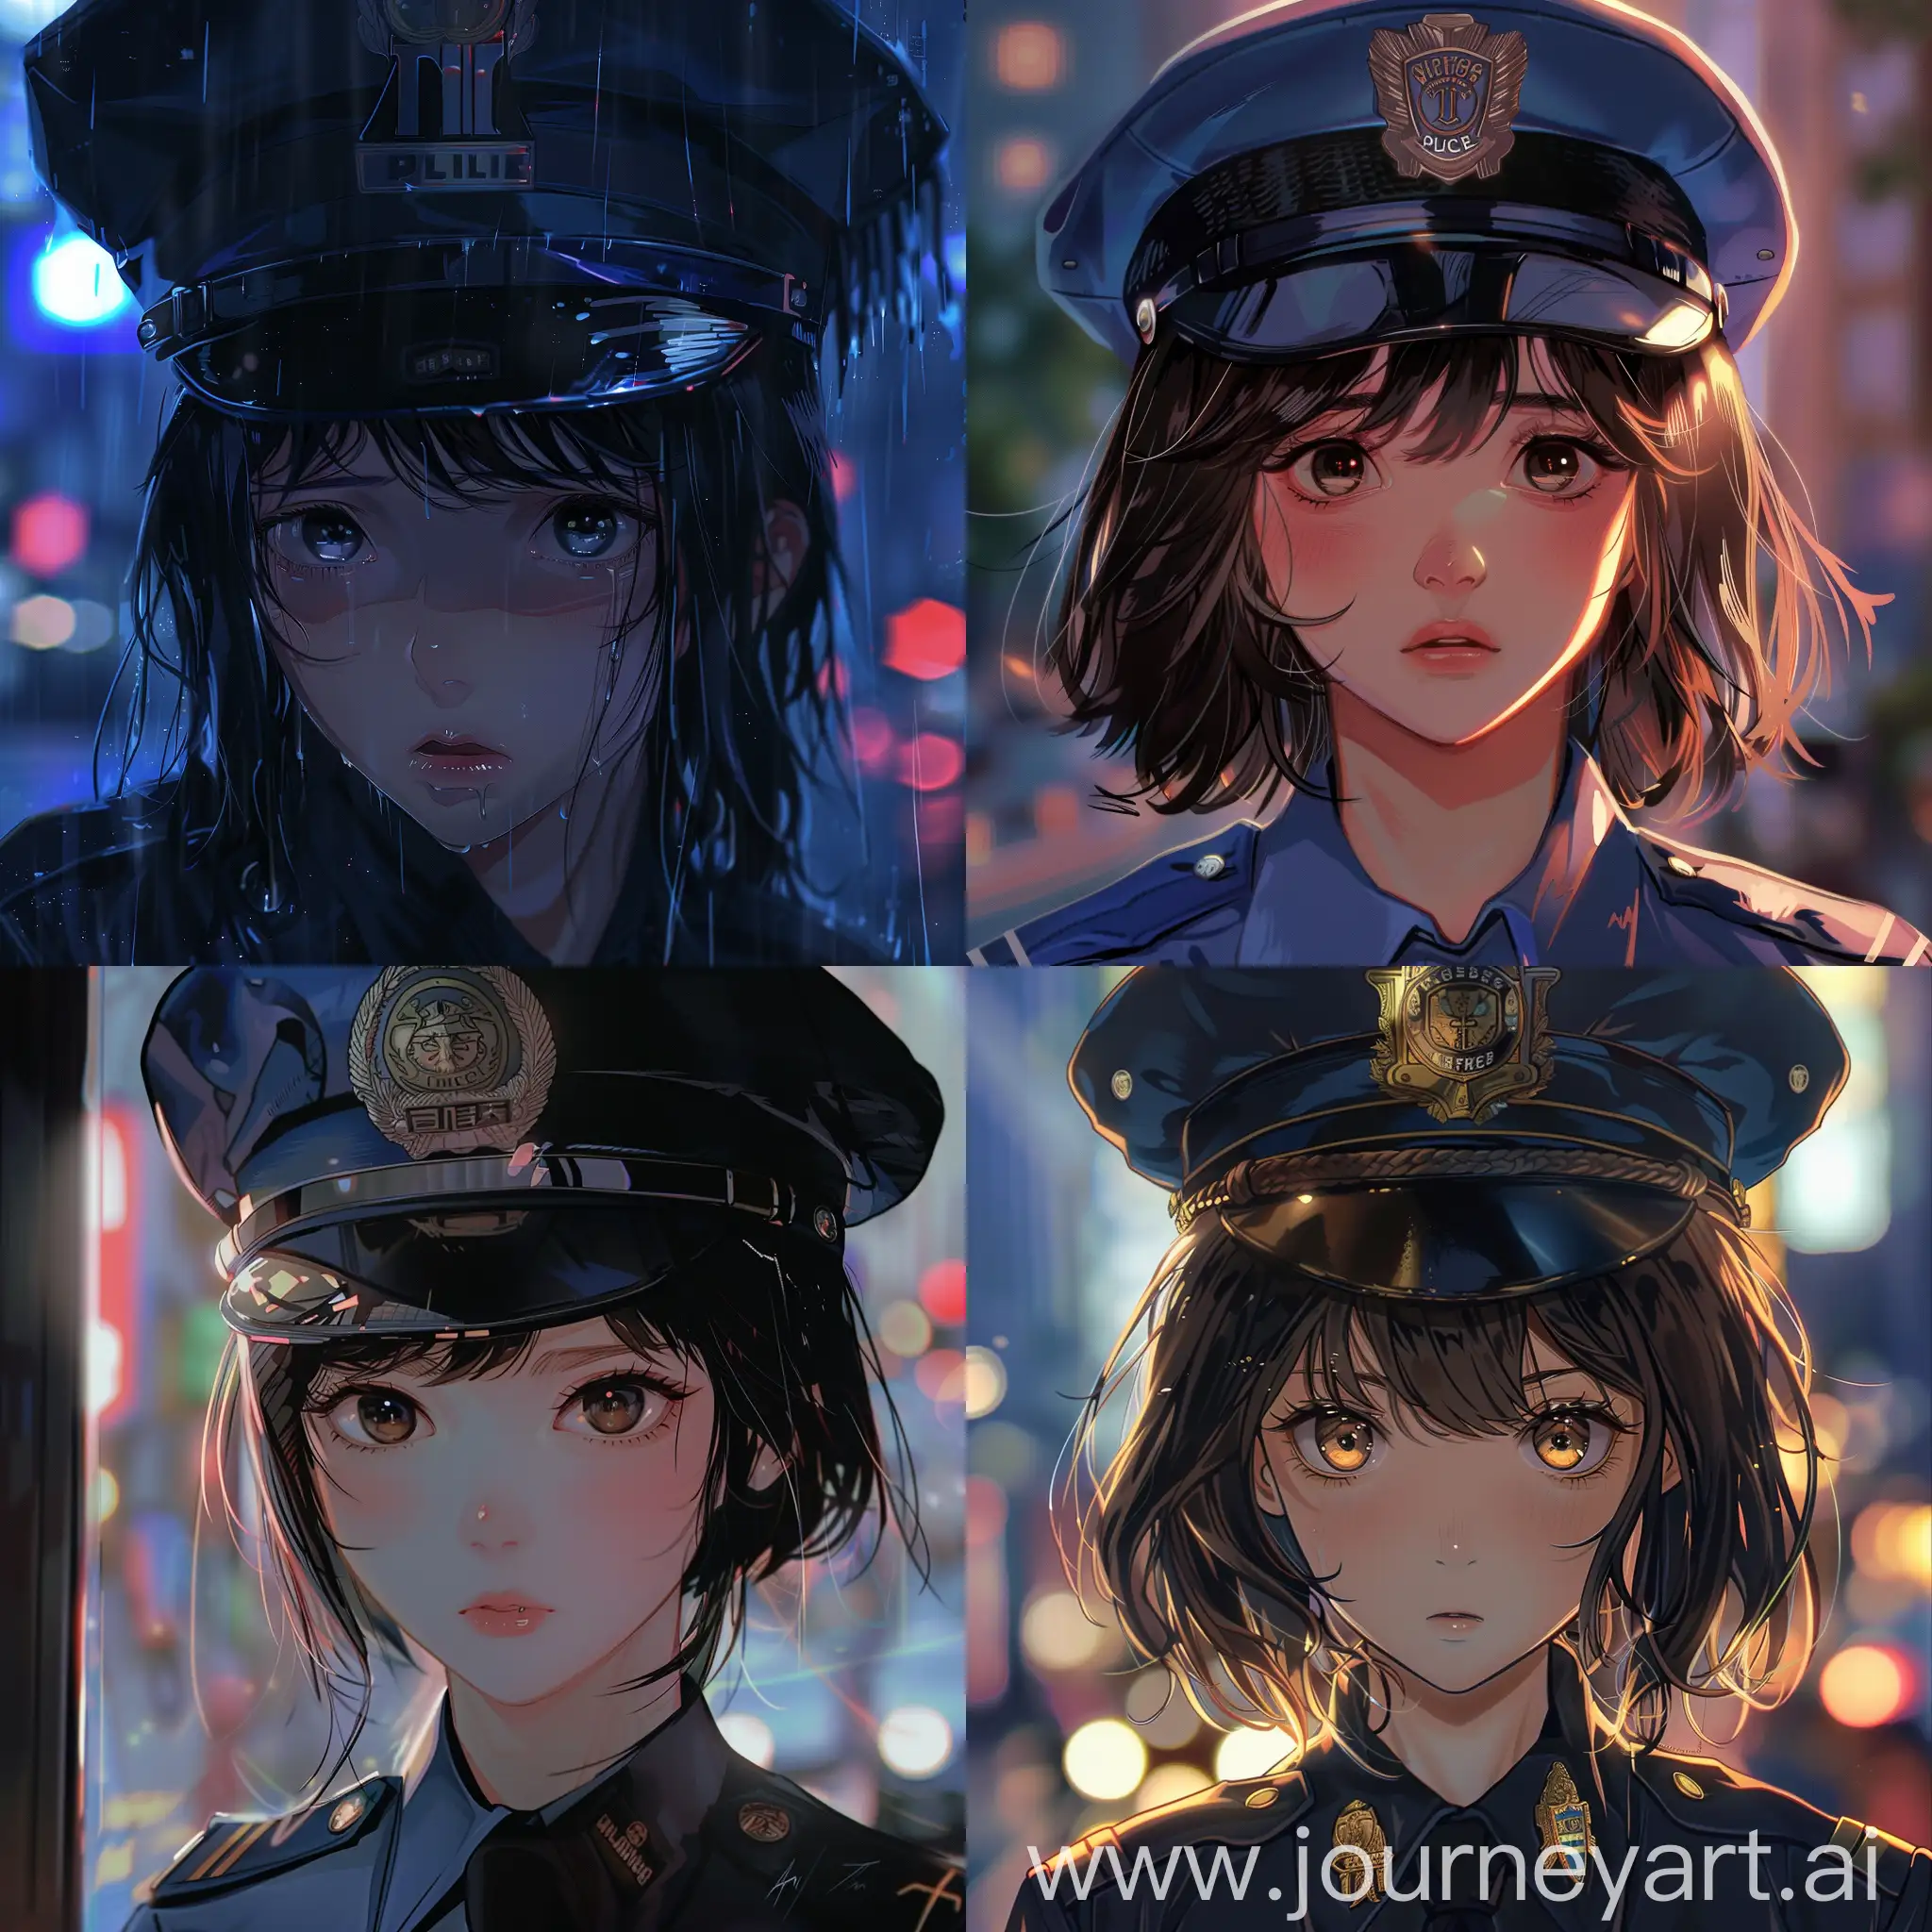 Anime-Girl-in-Police-Uniform-with-Tired-Eyes-Portrait